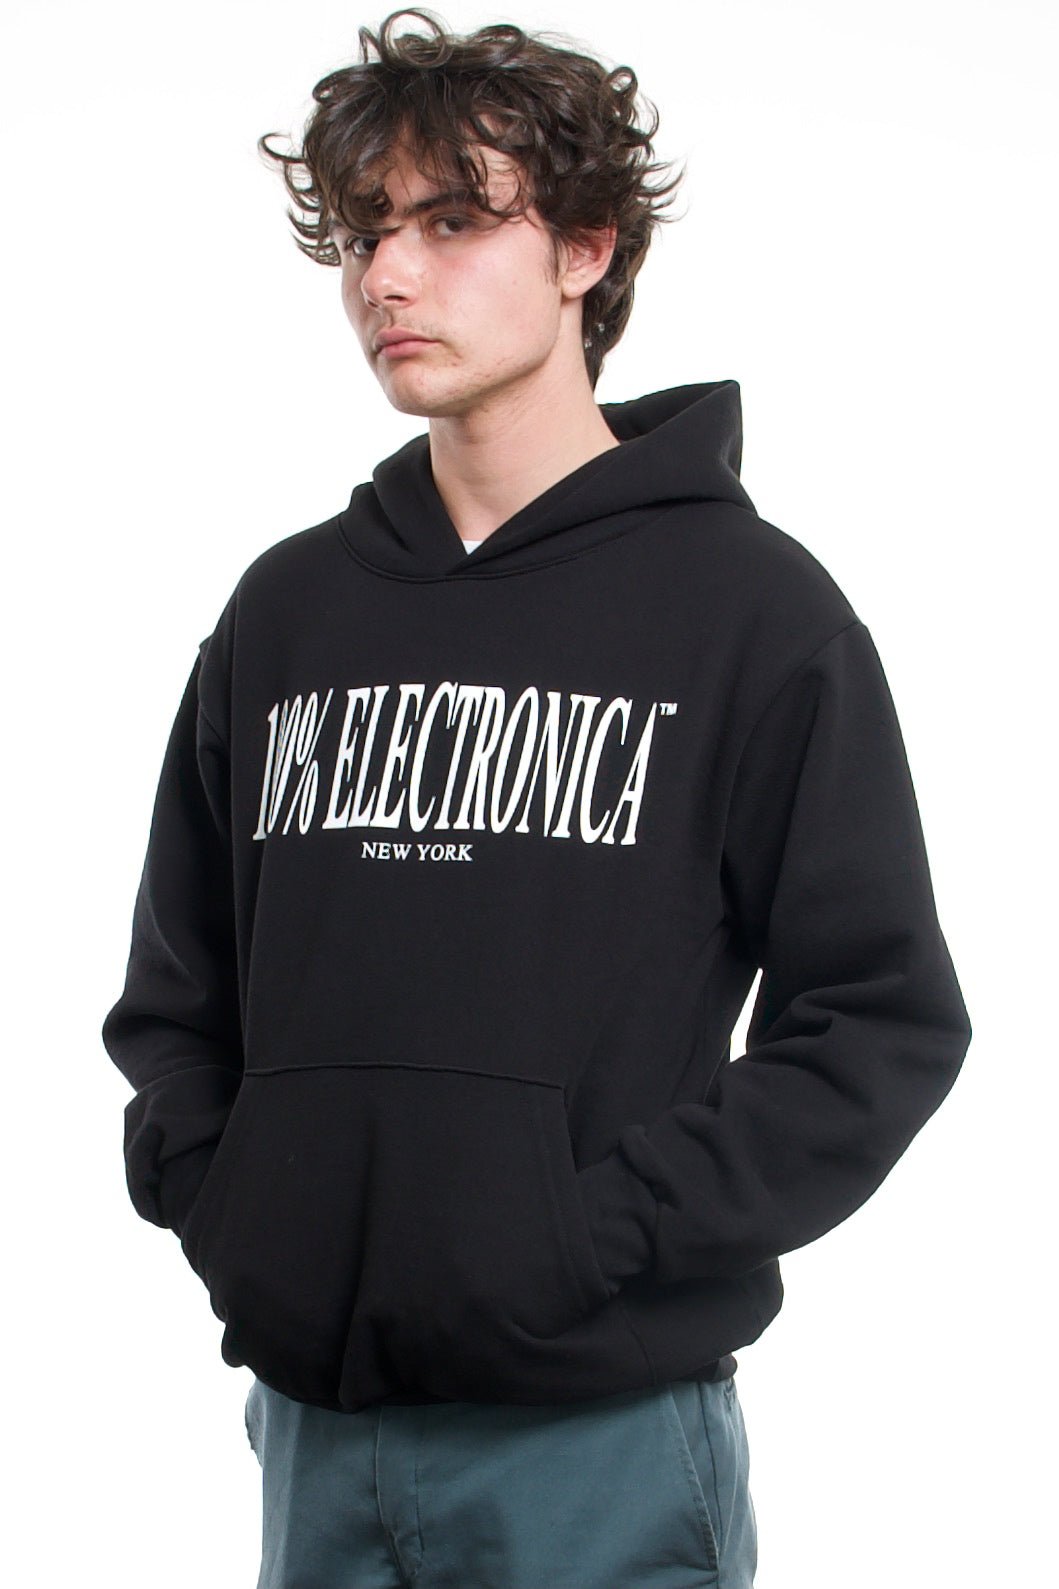 100% Electronica - 100% Electronica Hoodie - Black - 100% Electronica Official Store (Photo 3)